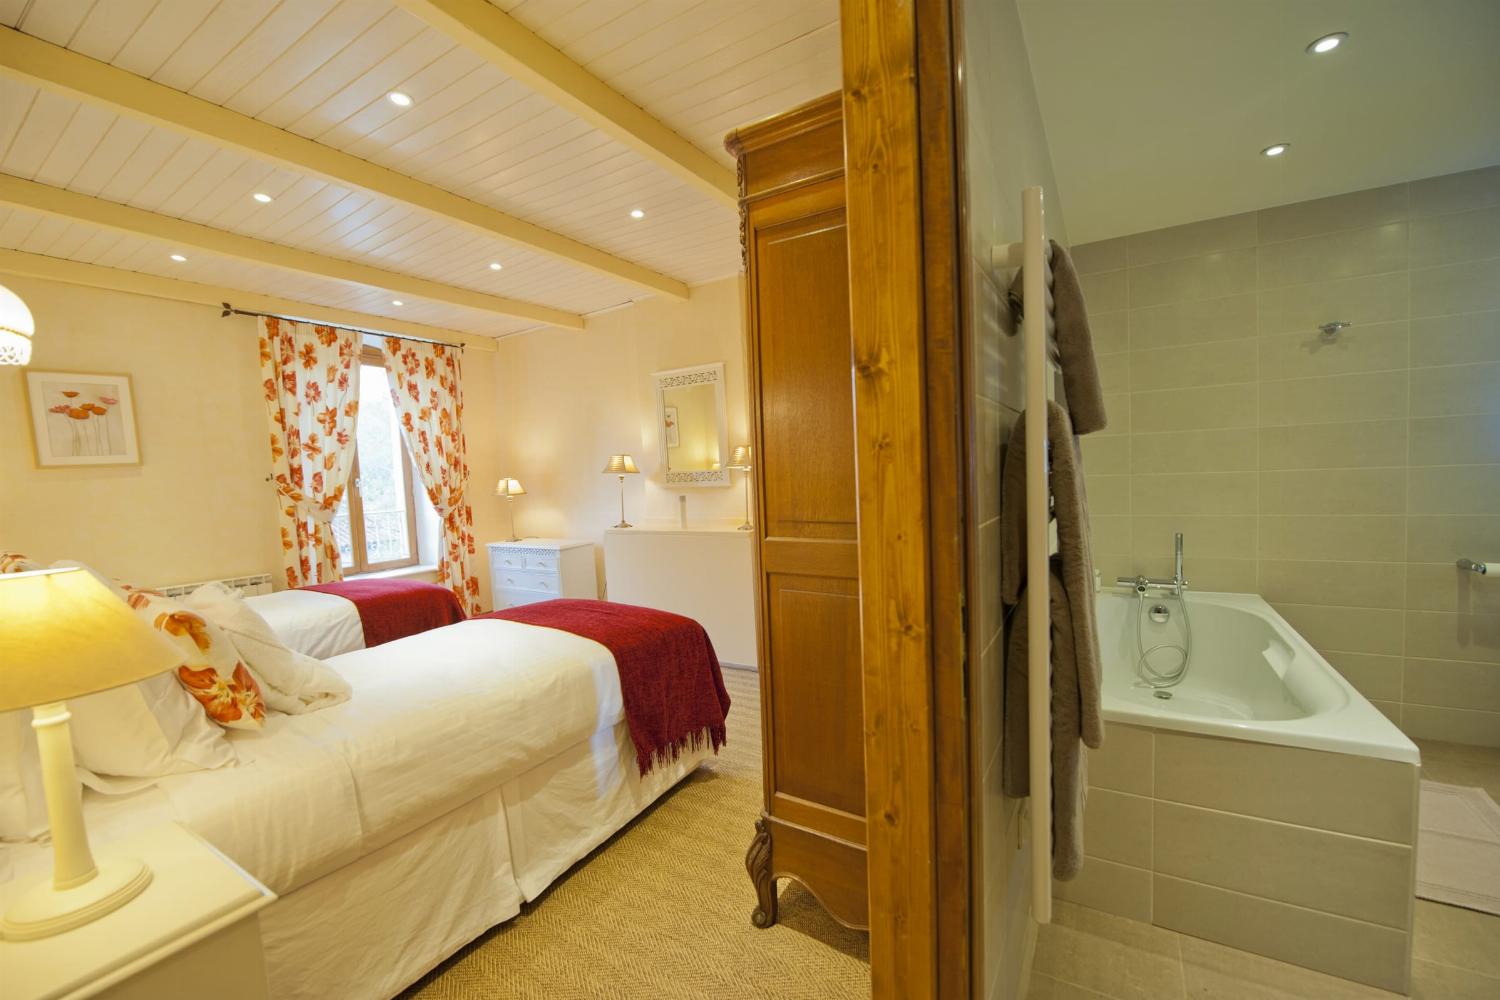 Bedroom and bathroom | Holiday home in South of France